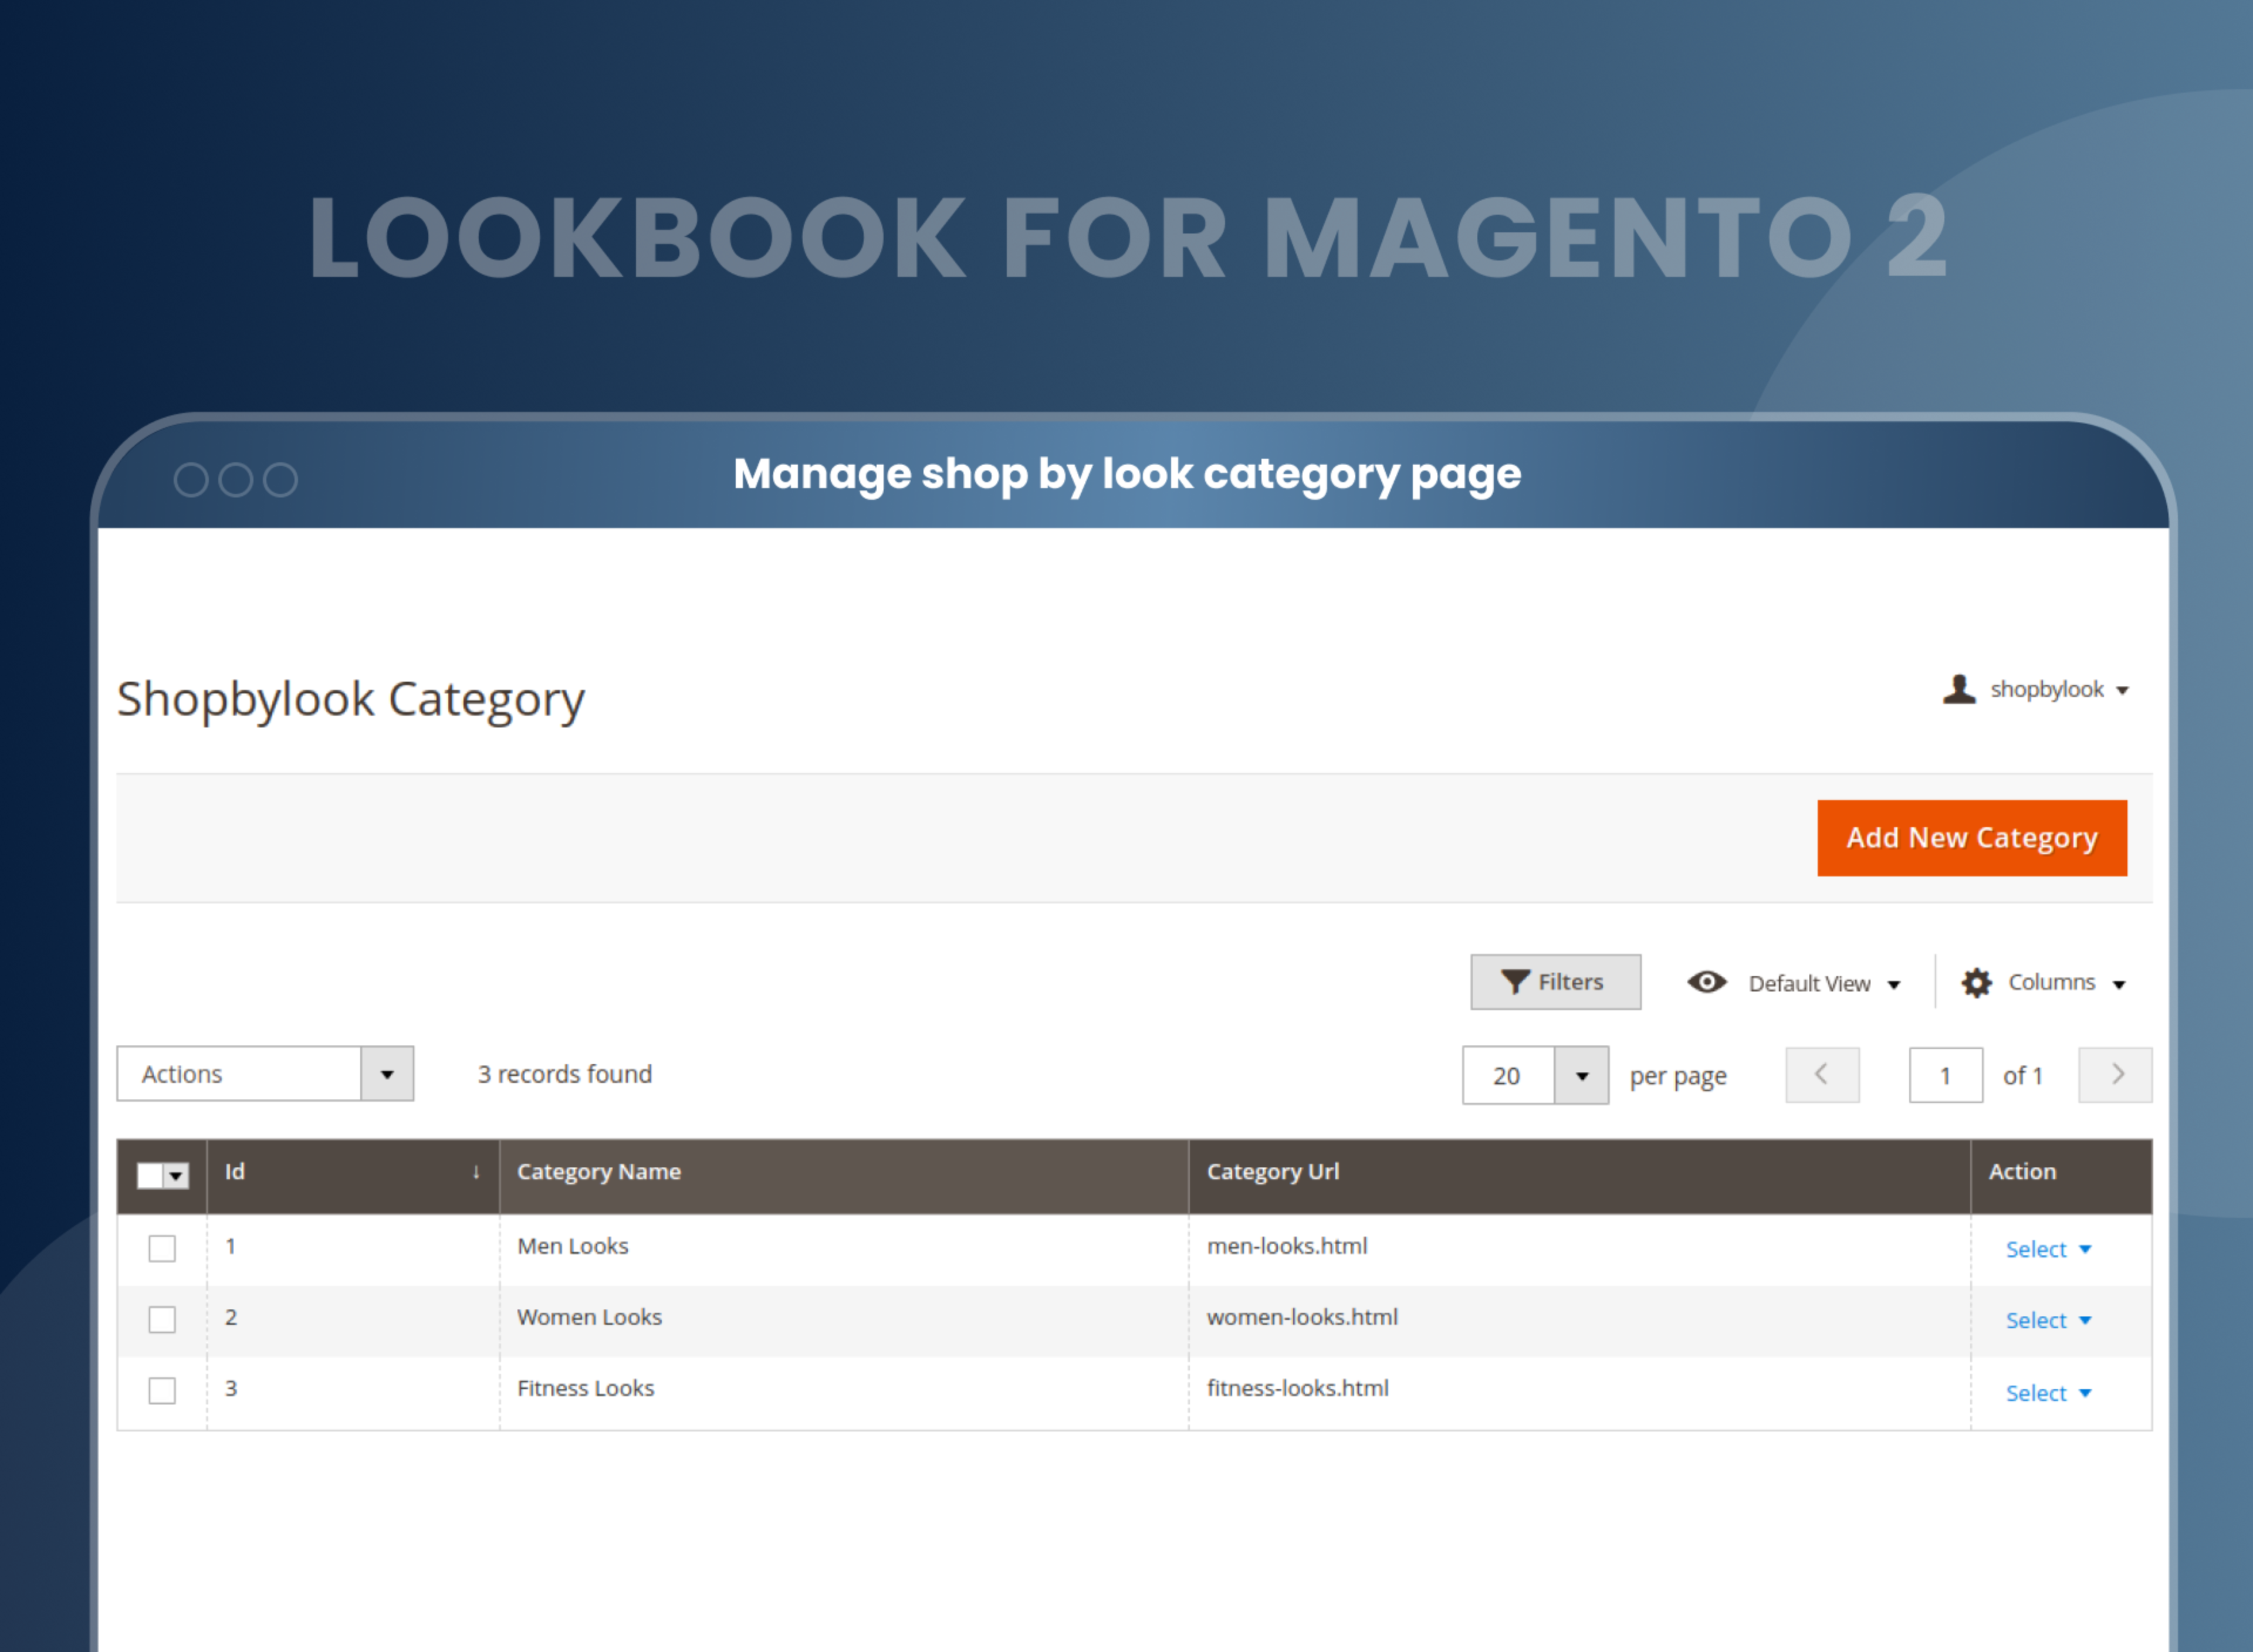 Manage shop by look category page